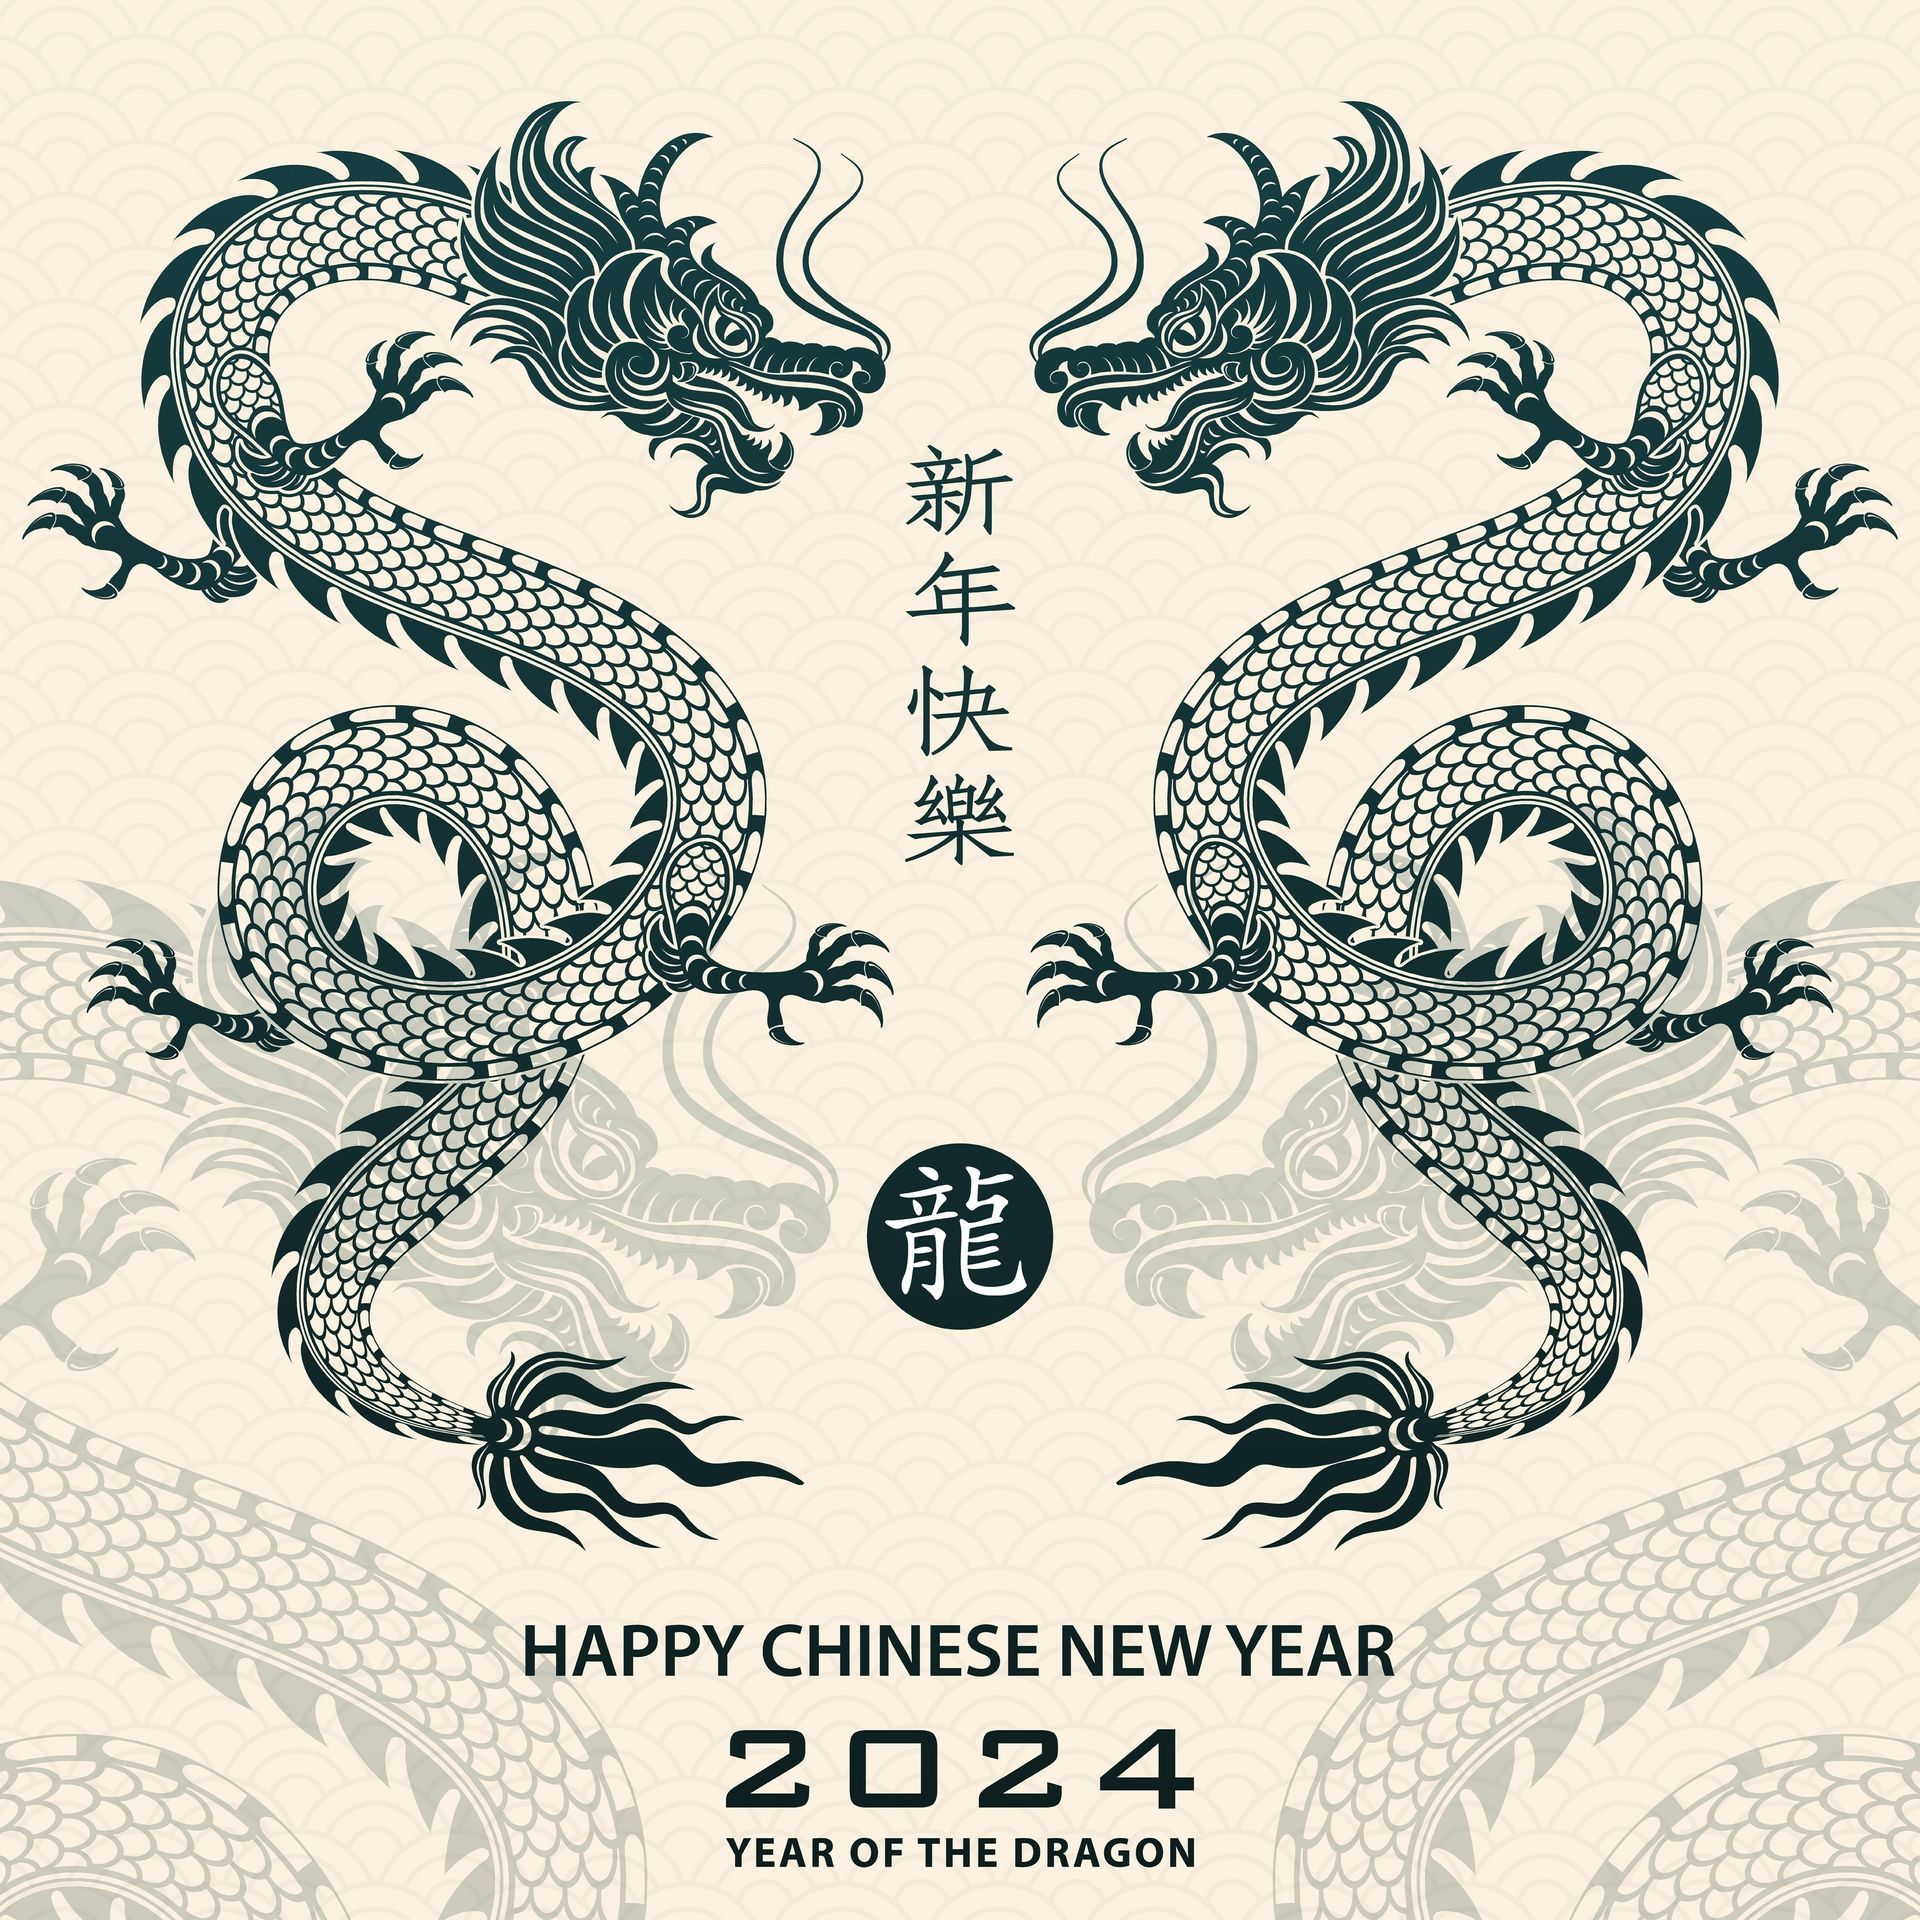 Feng Shui Astrology for 2024 Year of the Wood Dragon